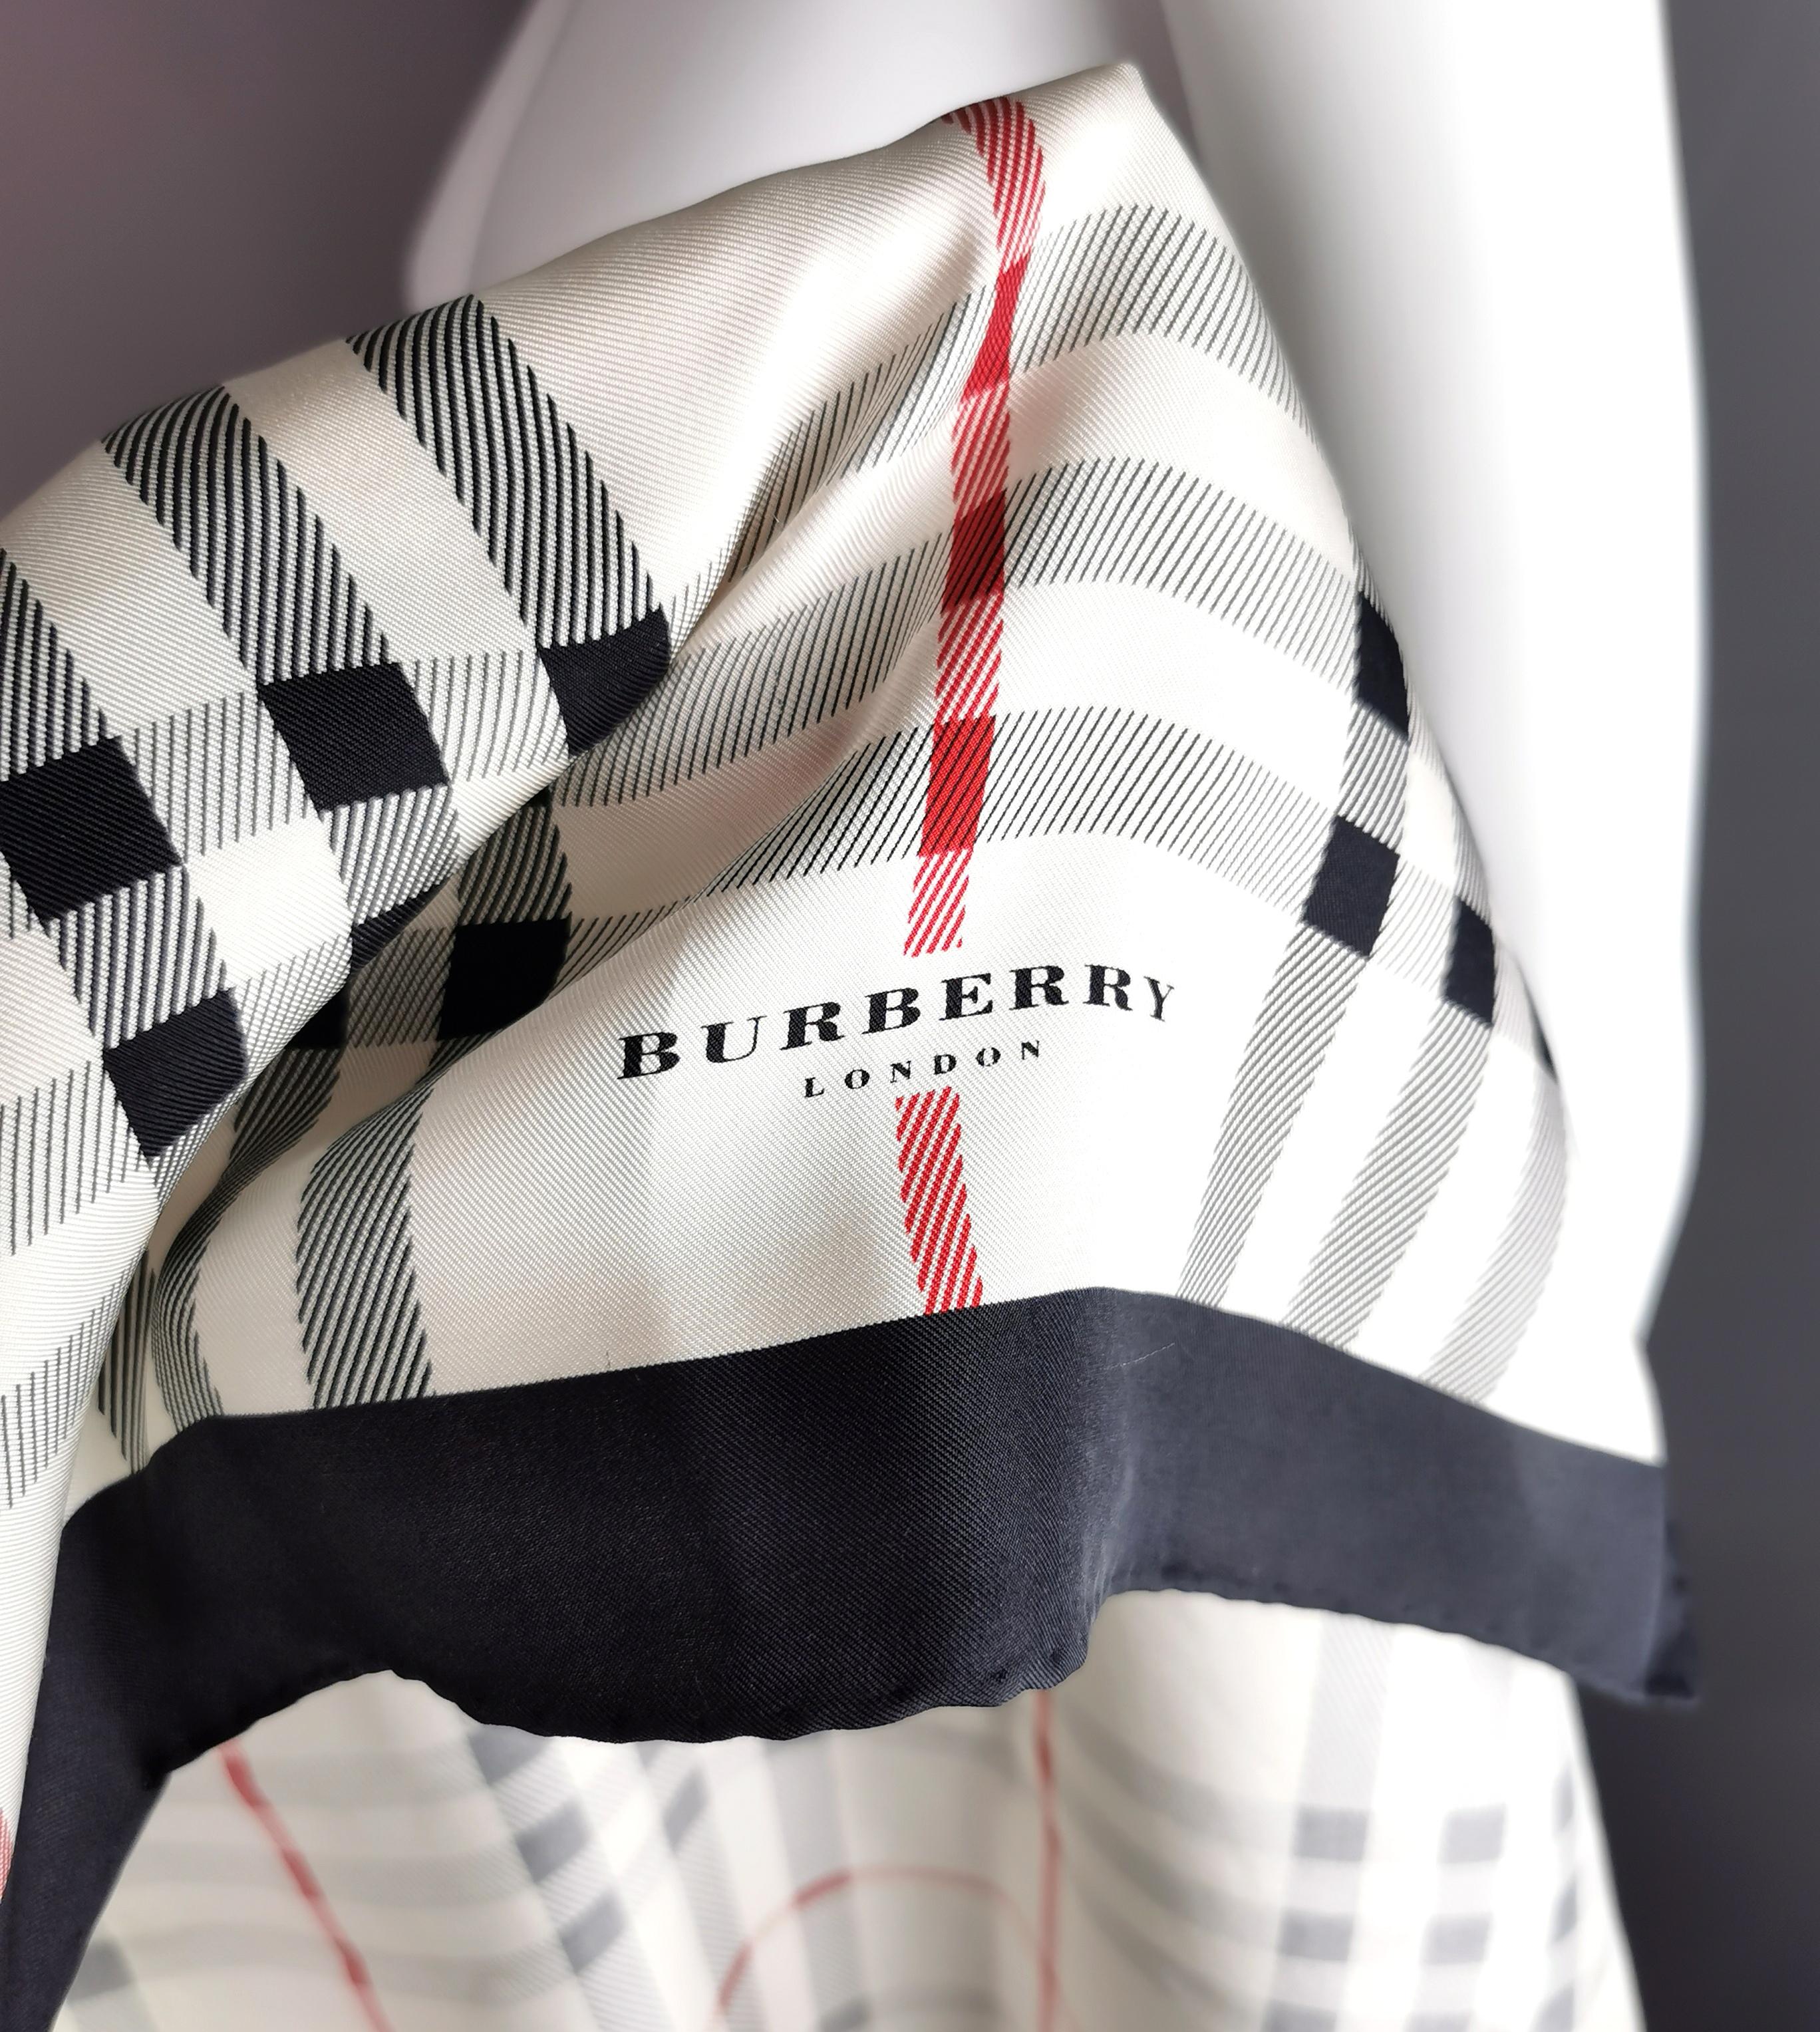 A stylish vintage Burberry check silk scarf.

It is a larger slightly off square shaped scarf in off white, red and black with a signature check print.

Branding printed to the corner of the scarf Burberry London.

The scarf has a tag for 100% silk